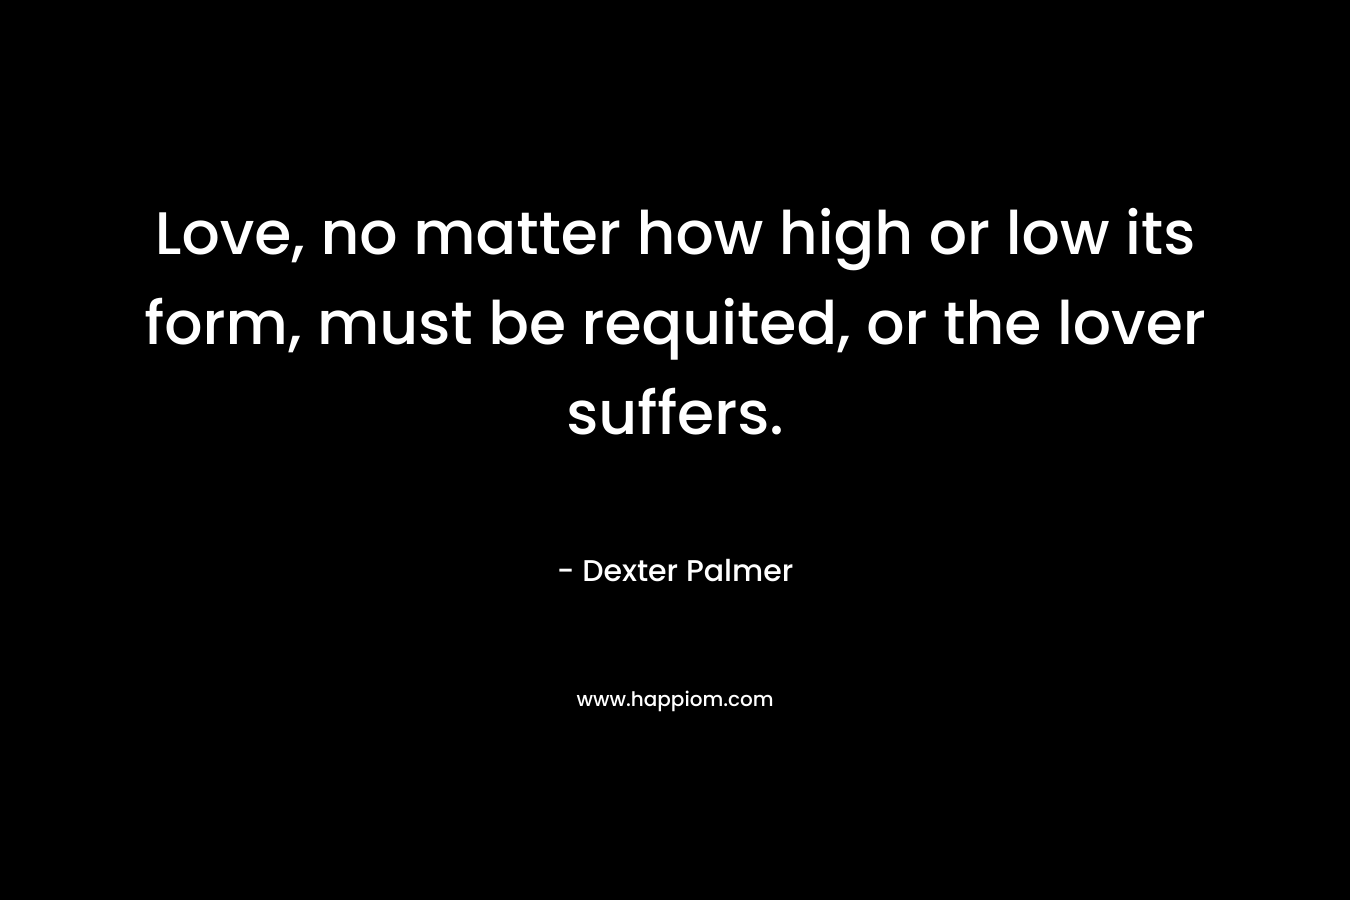 Love, no matter how high or low its form, must be requited, or the lover suffers. – Dexter Palmer